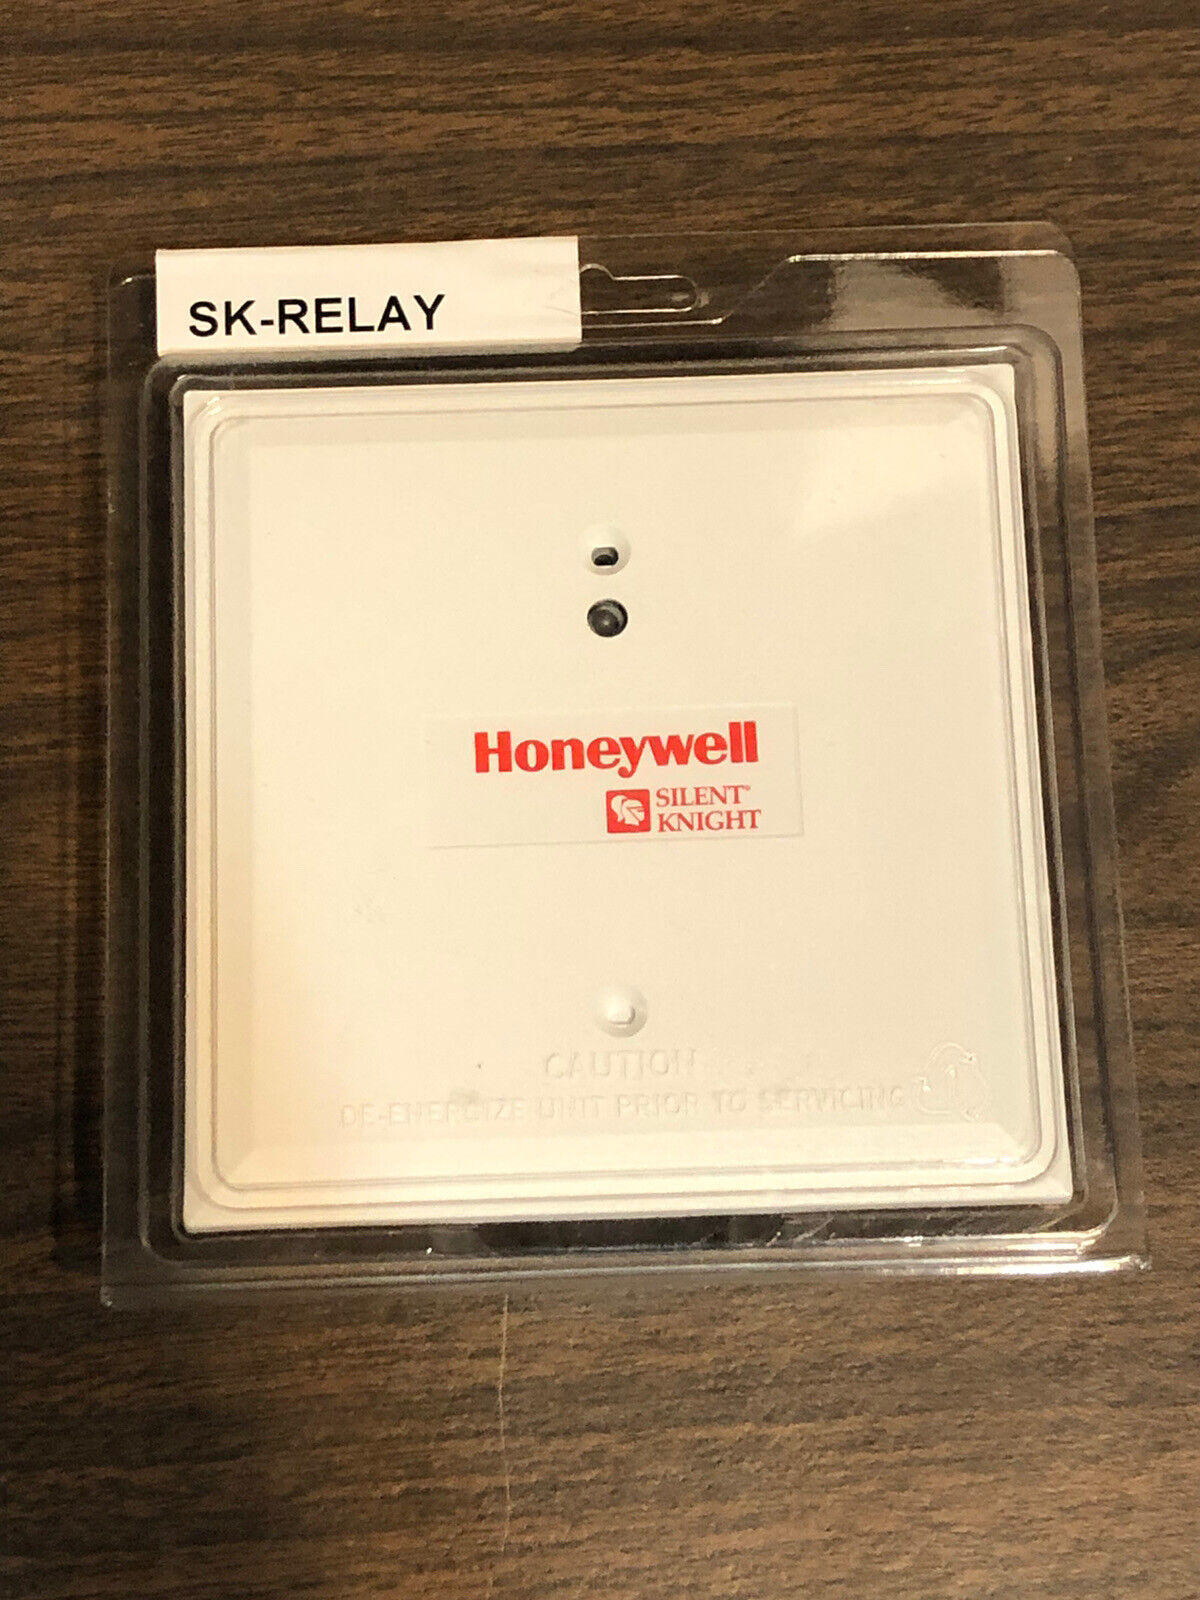 **NEW**  Honeywell Silent Knight Security SK-RELAY